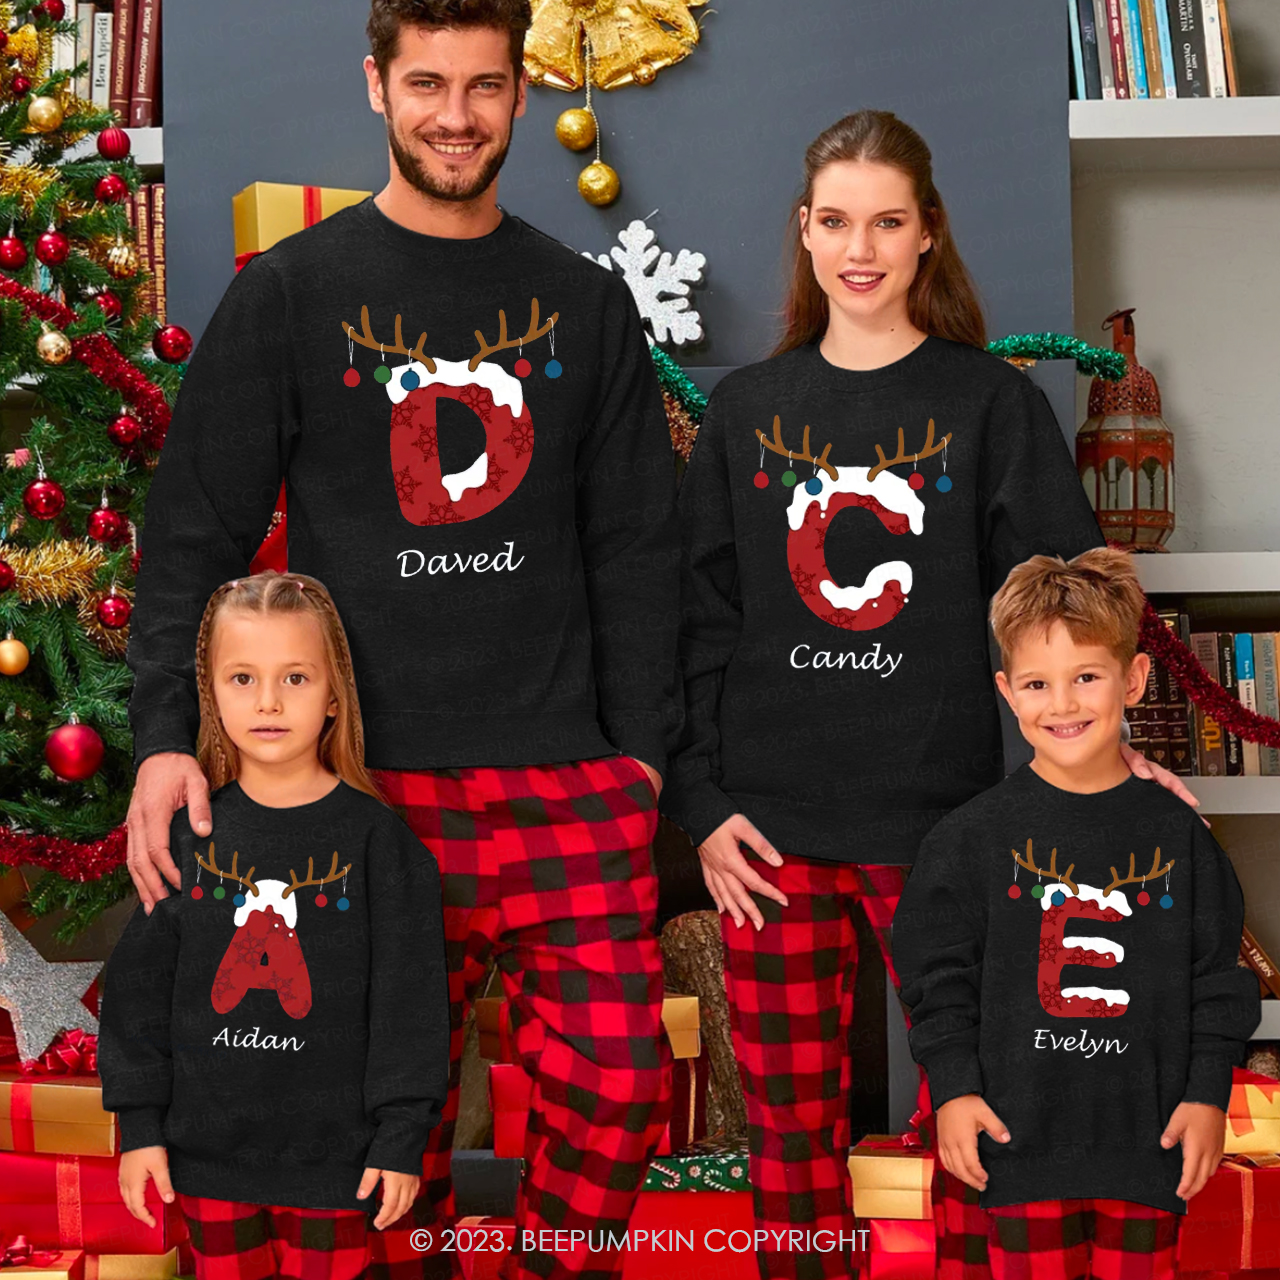 Christmas Day Sales, Family Christmas T-shirts & Clothing Deals